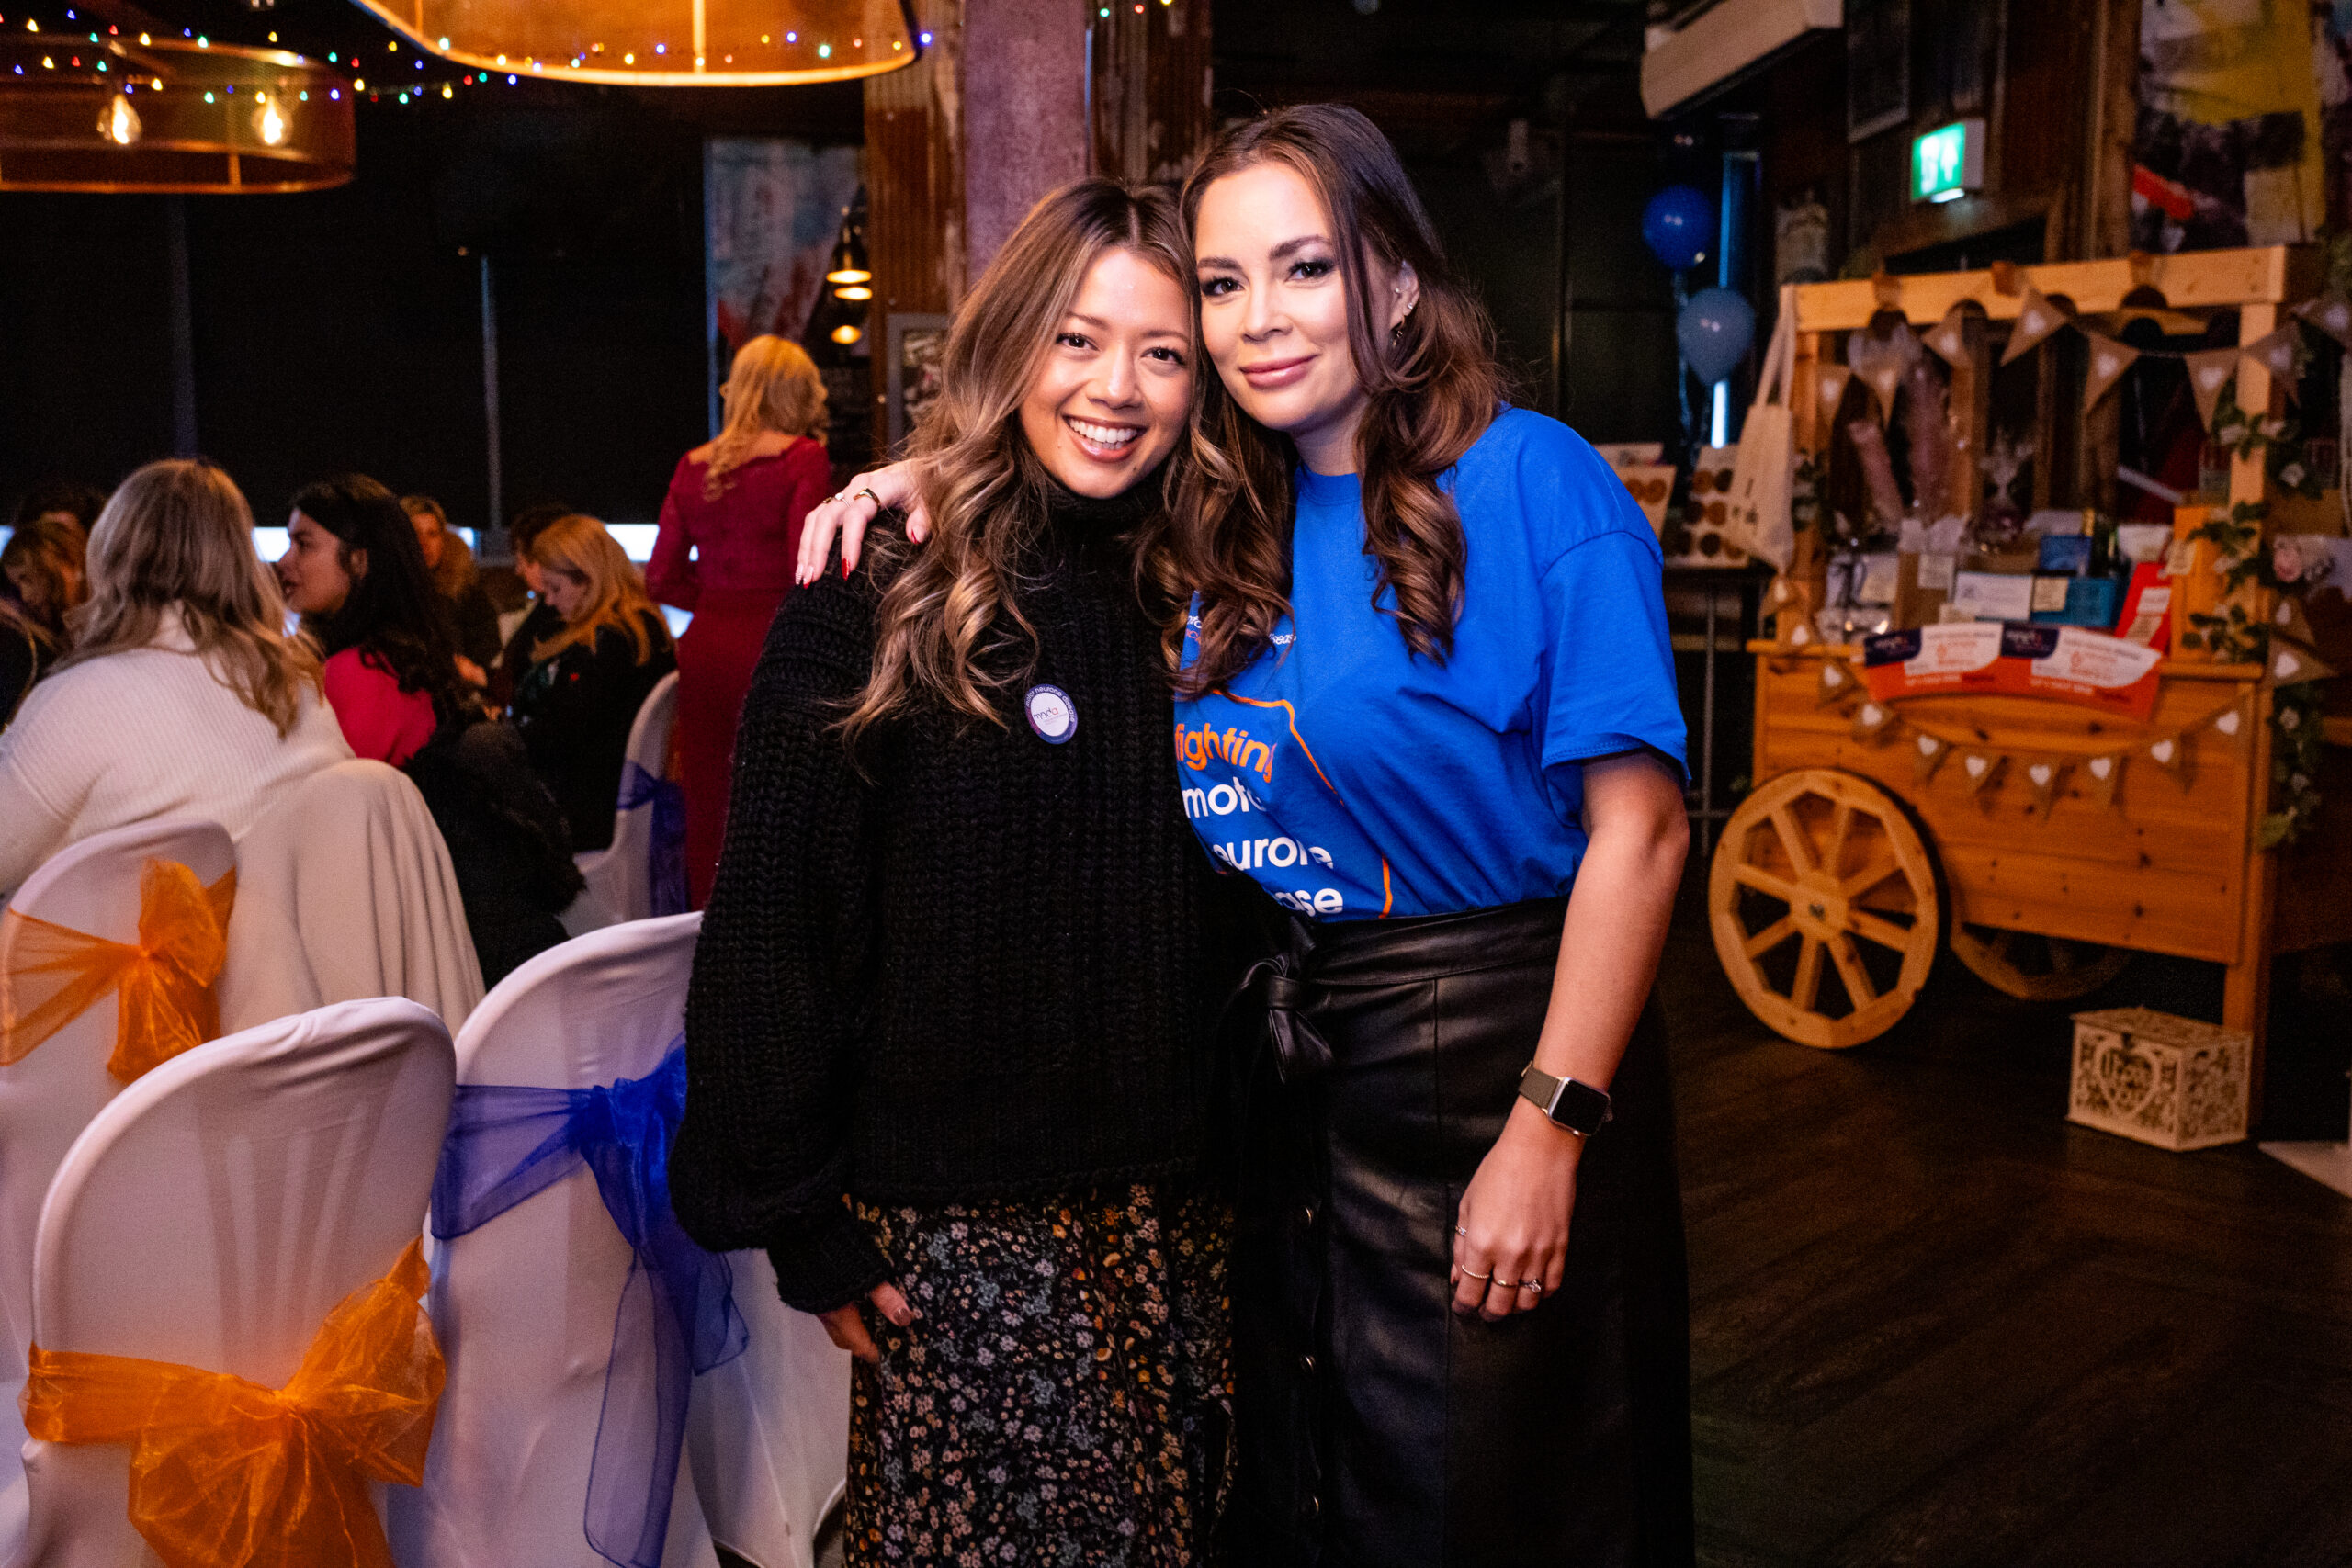 Over £1,100 was raised  for the Merseyside MND Association through a Christmas Makeup Masterclass Fundraiser organised by Rosie Cleave and Amanda Borg at The Southport Coaster pub in Southport. Rosie (right) with her sister Victoria Cleave (left). Photo by Banak Photography 